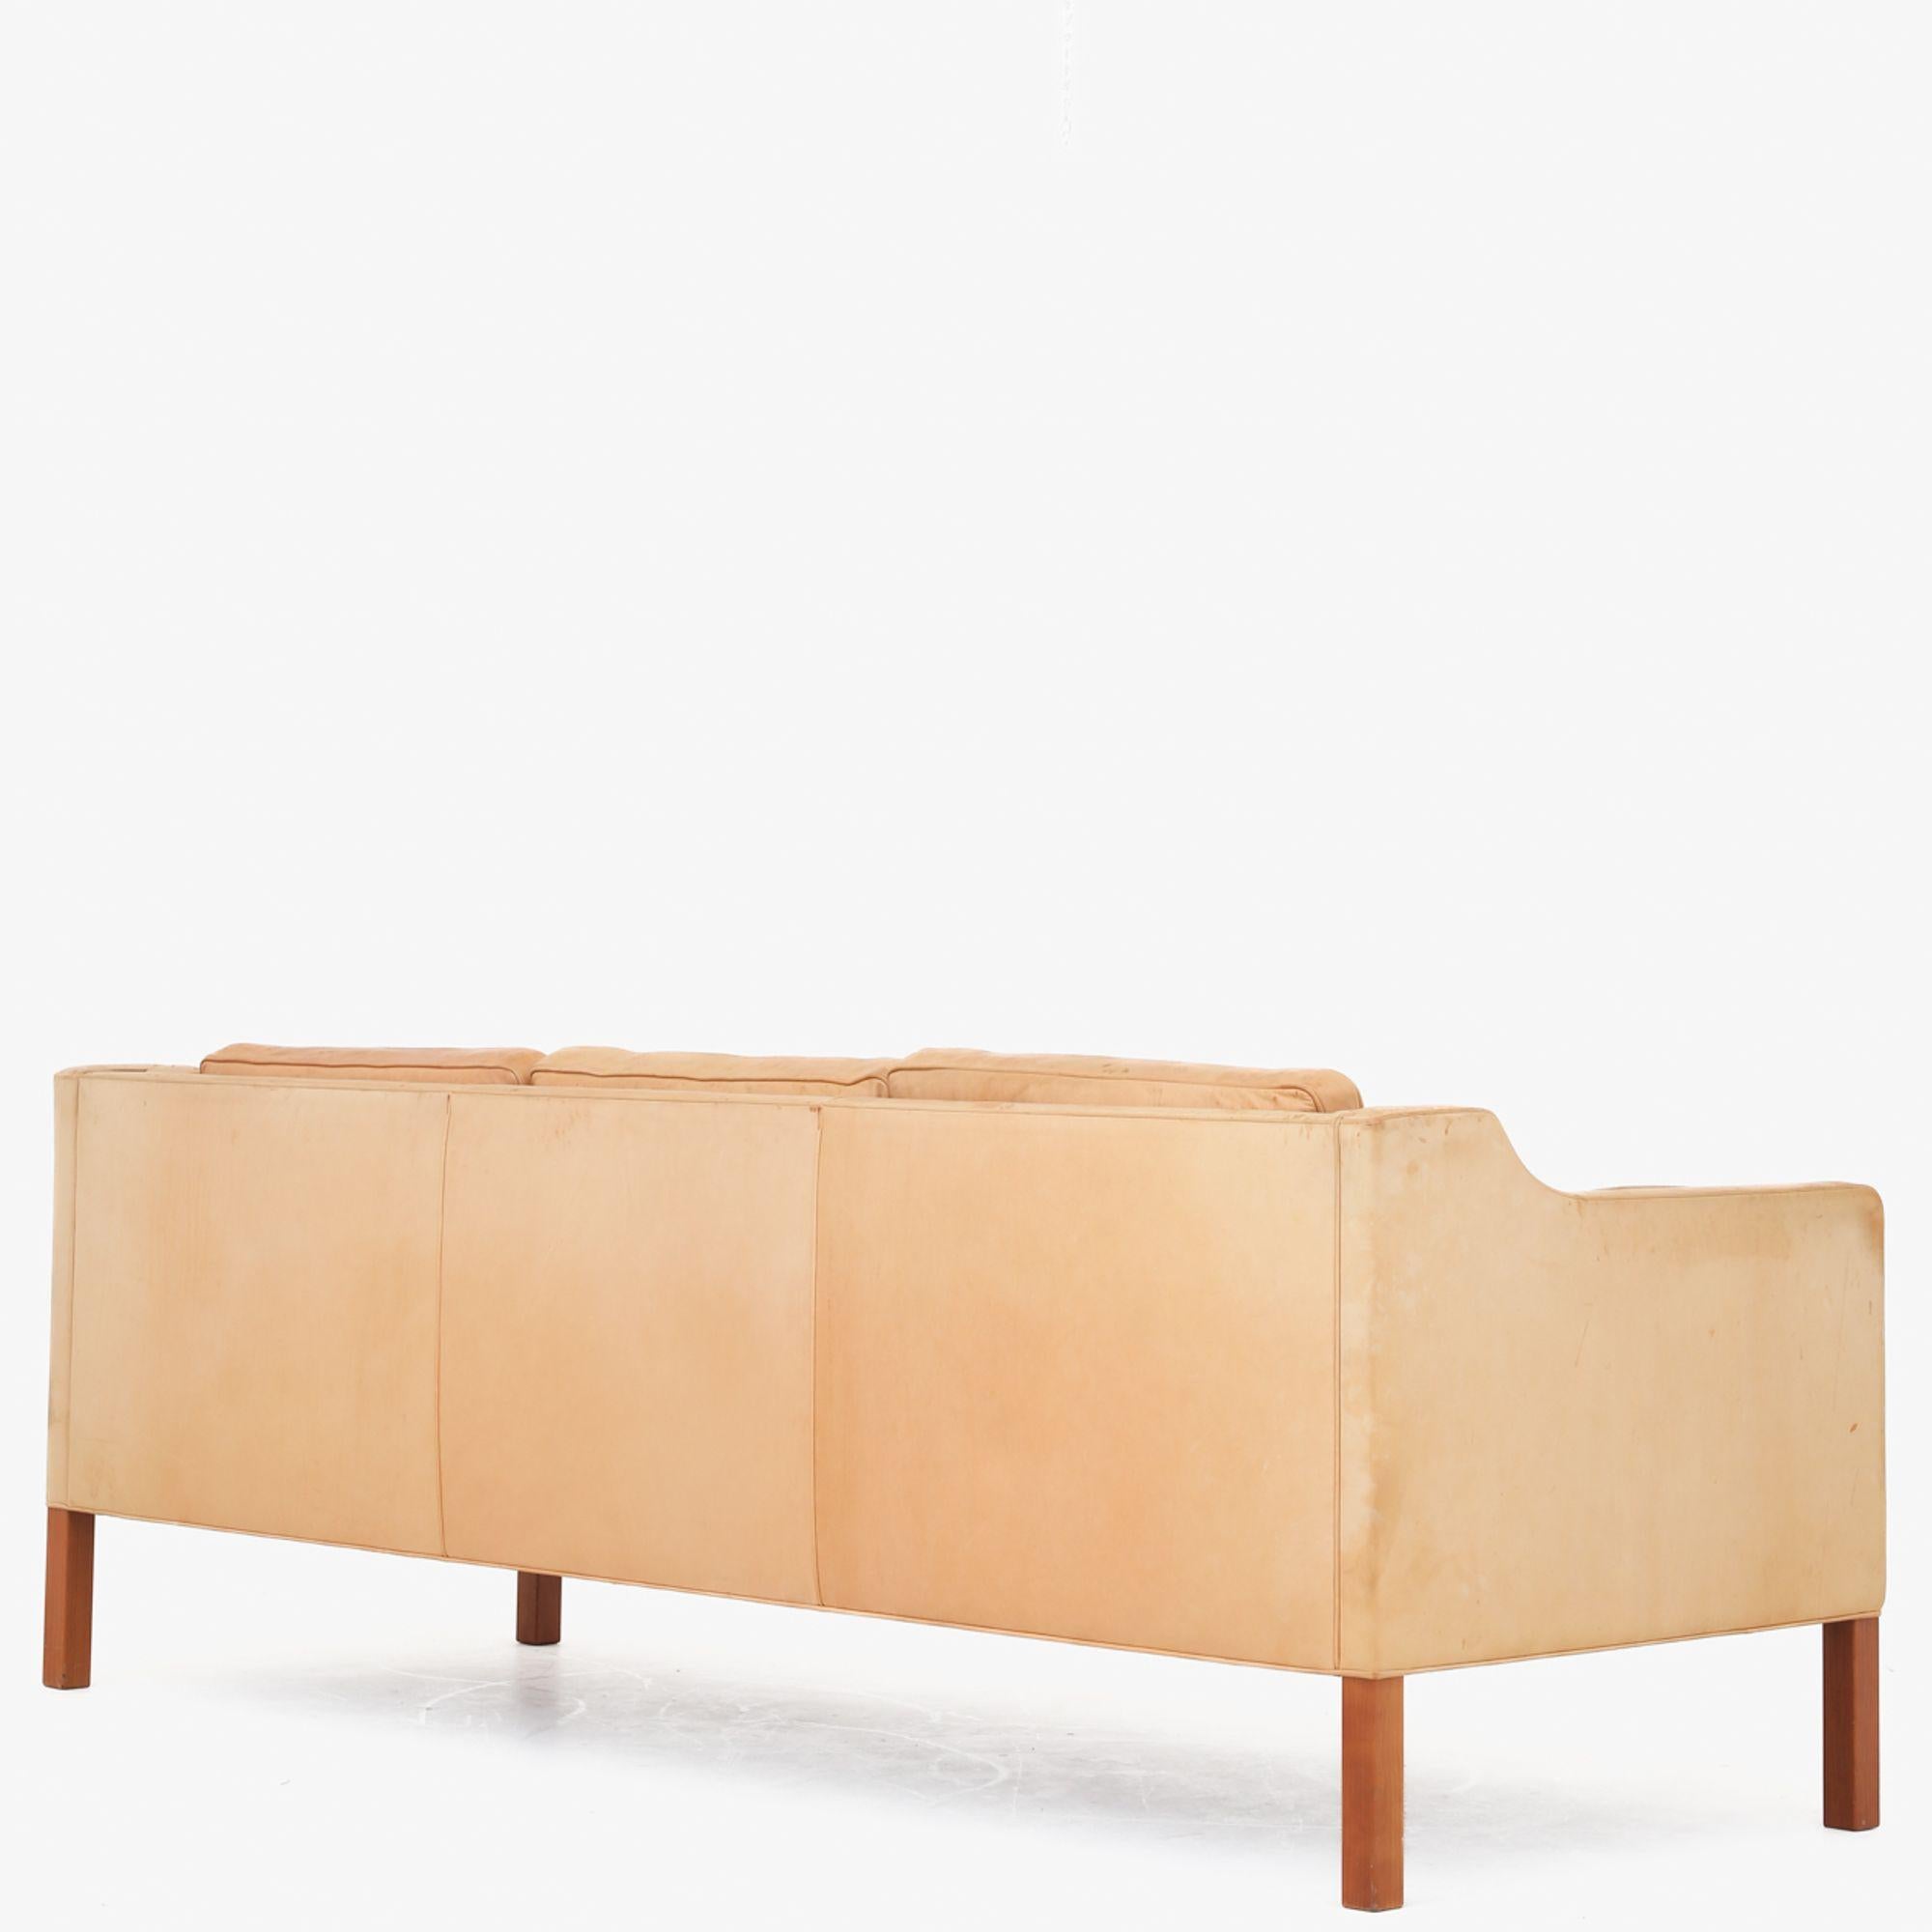 BM 2213 - 3 seater sofa in patinated natural leather and legs in cherry wood. Børge Mogensen / Fredericia Furniture.